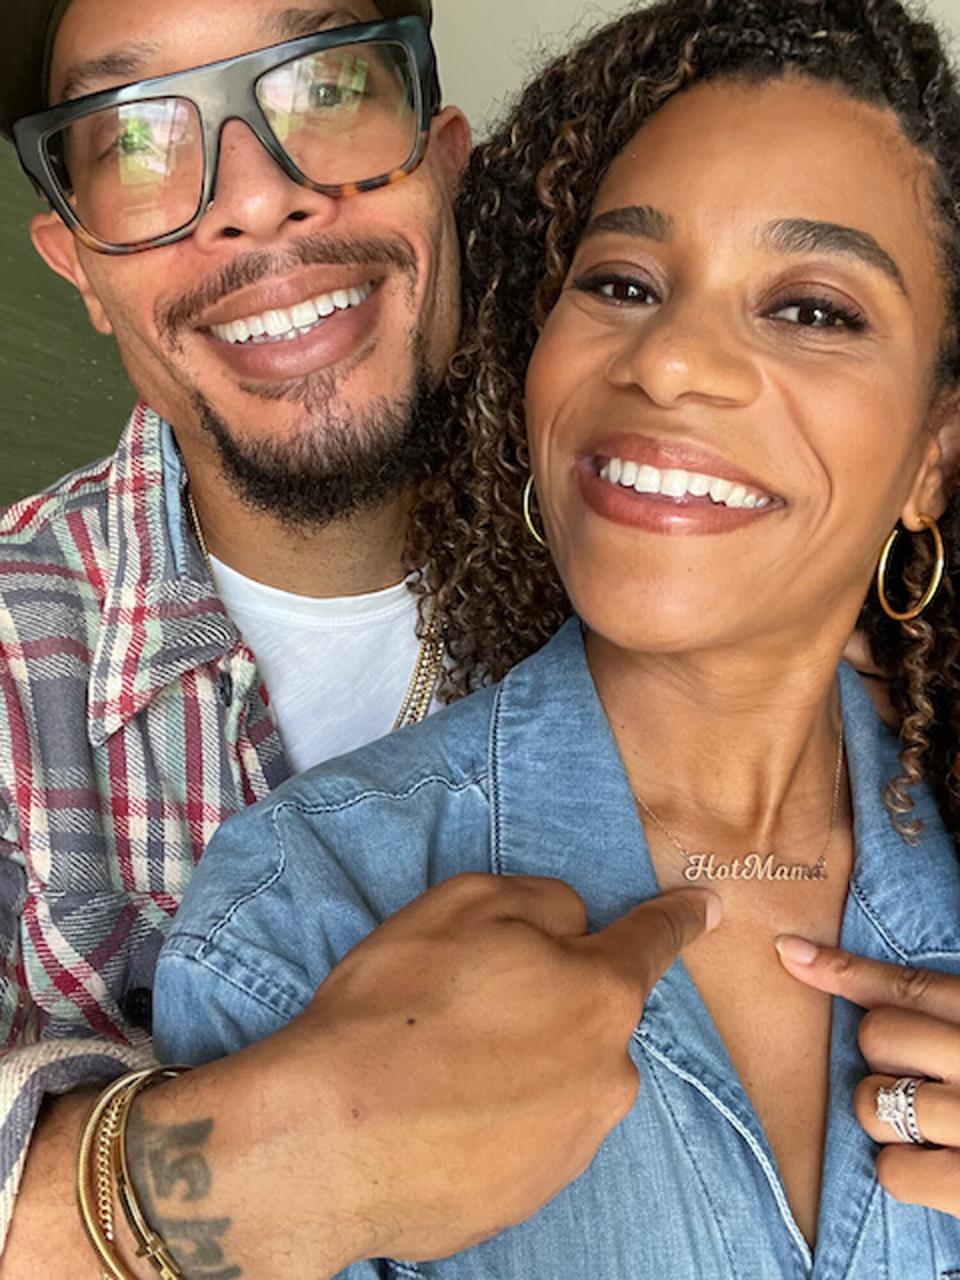 Grey’s Anatomy’s Kelly McCreary Is Expecting Her First Child